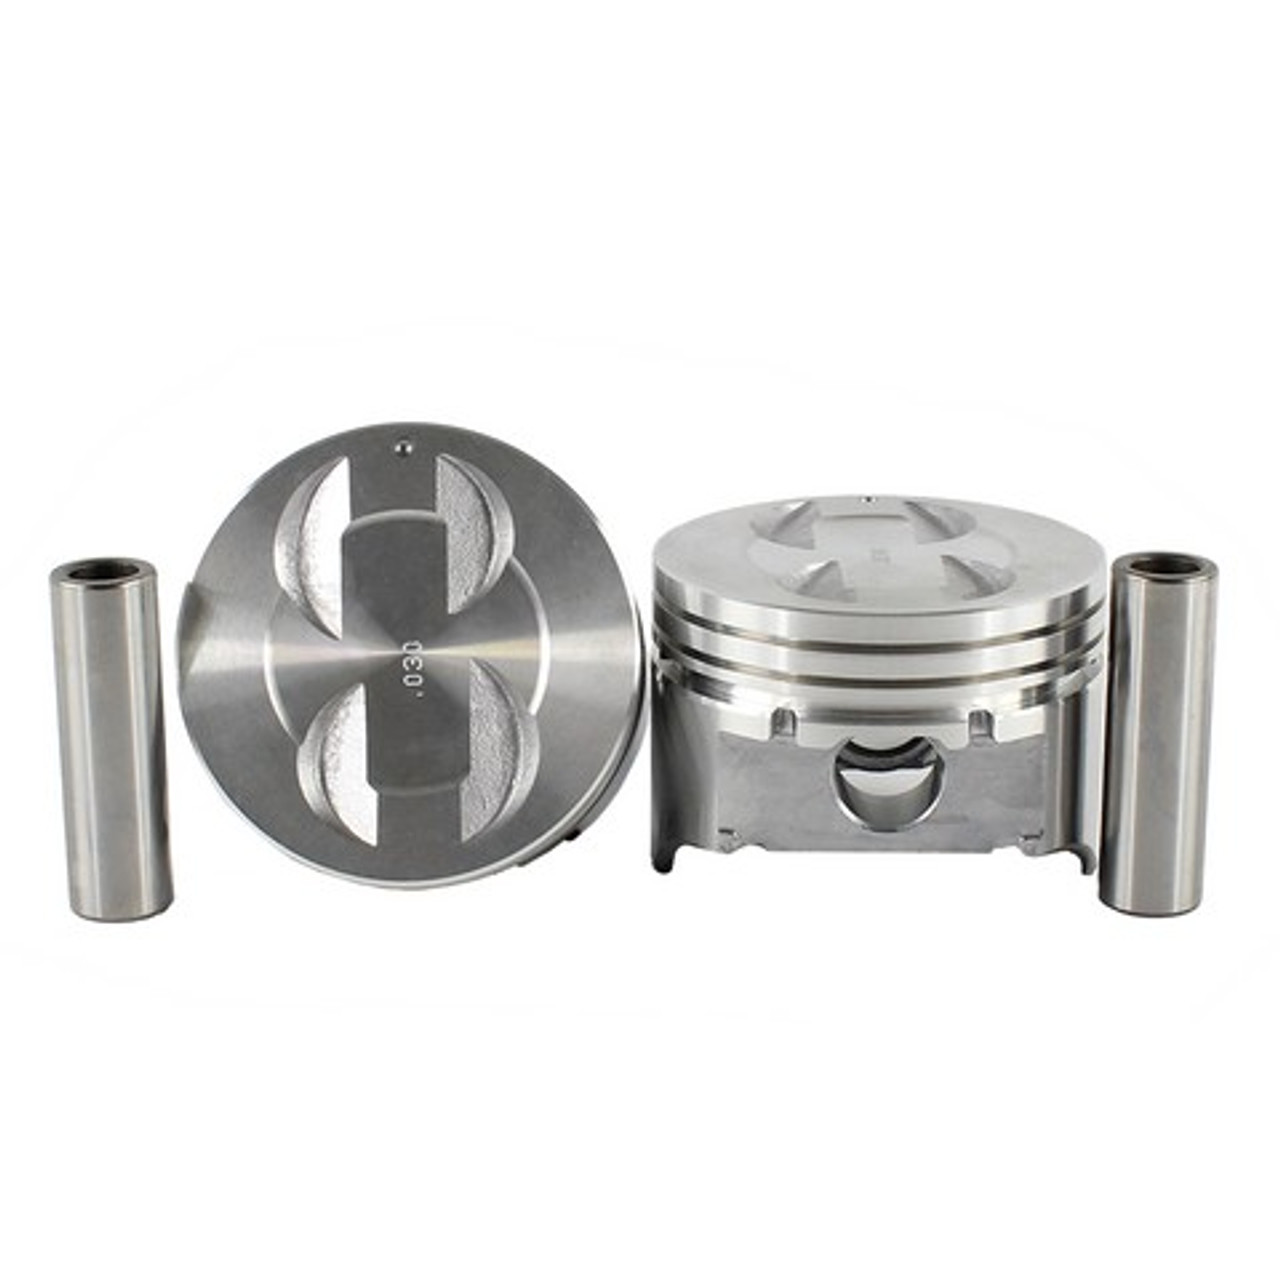 Piston Set 5.0L 1987 Ford Mustang - P4113A.50